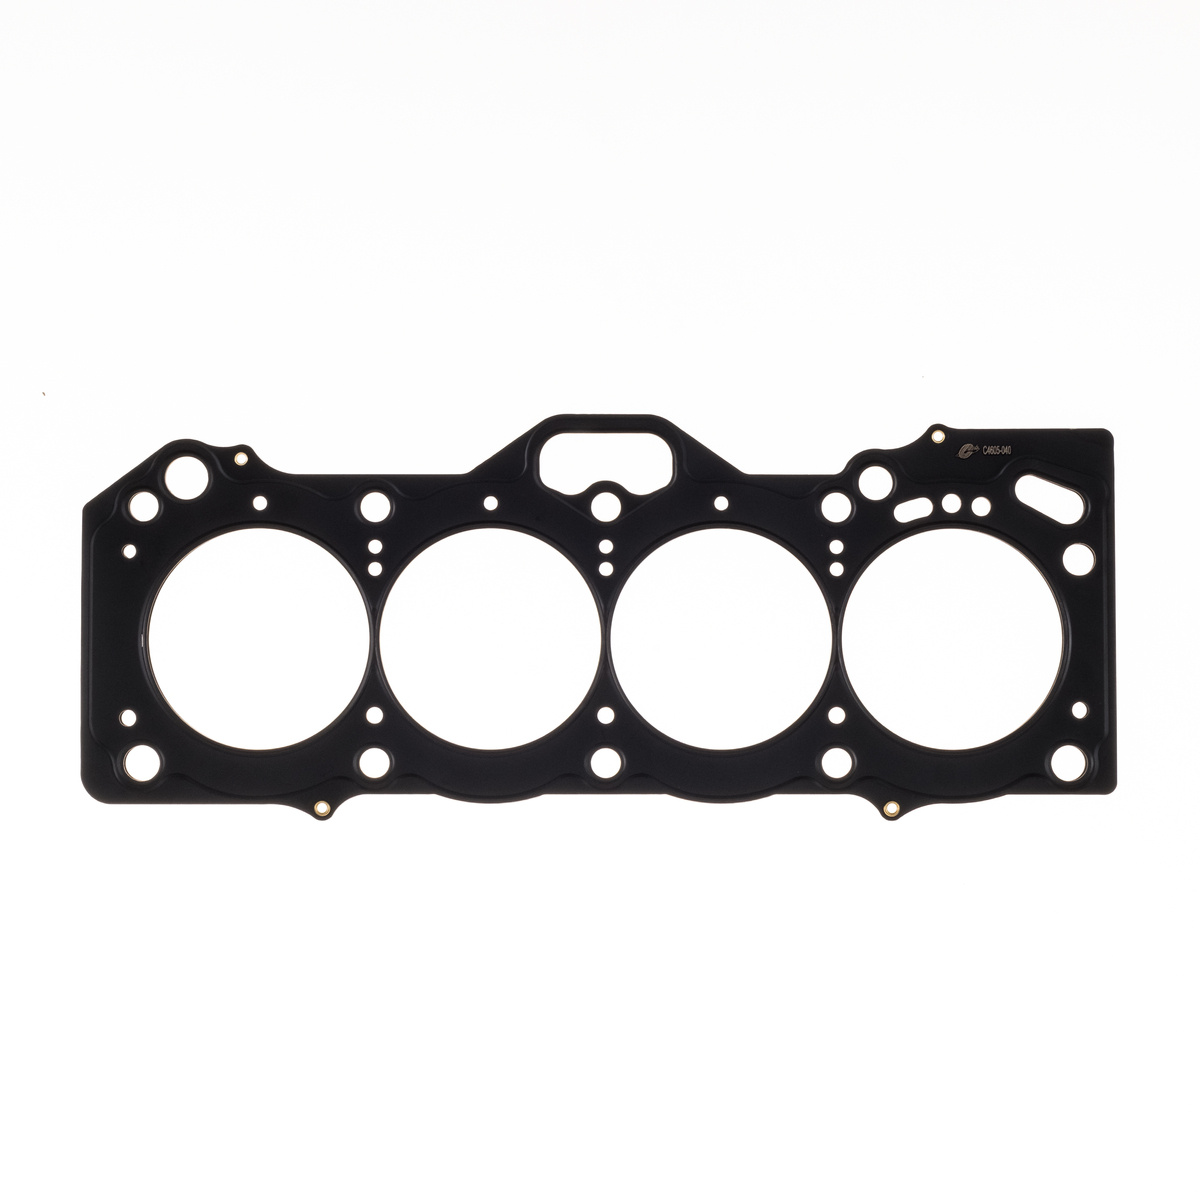 Cylinder Head Gasket Toyota 4A-GE .040" MLS , 83mm Bore, 20-Valve Cometic C4605-040